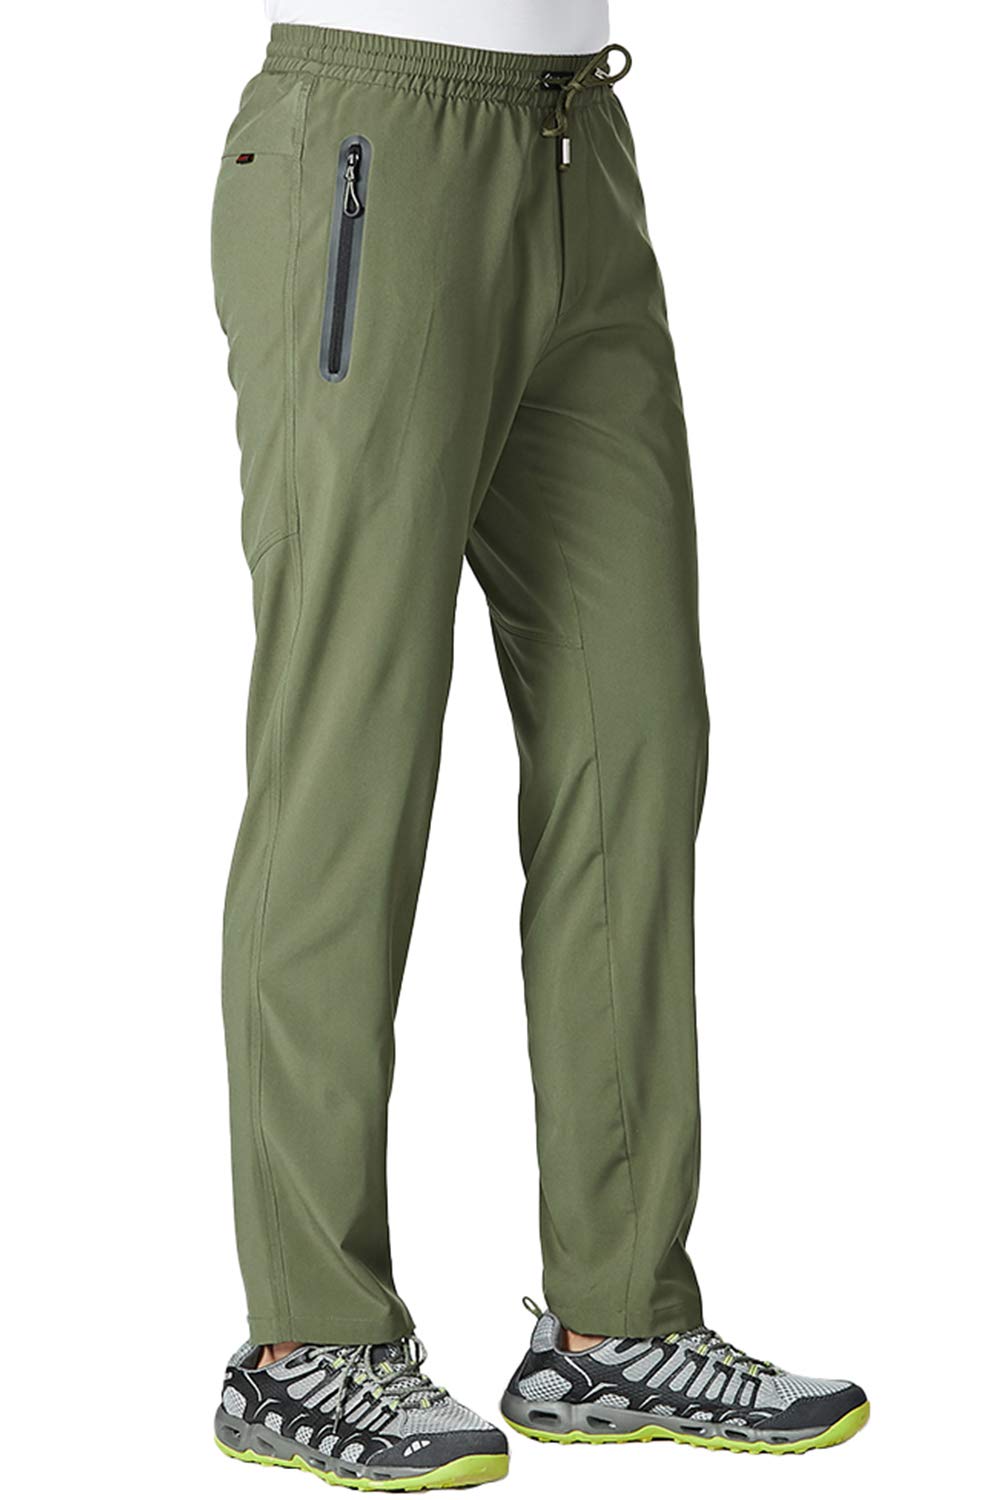 TBMPOY Men's Travel Hiking Pants Lightweight Athletic Wind Athletic Pant Windbreaker Fishing Active Jogger Green S